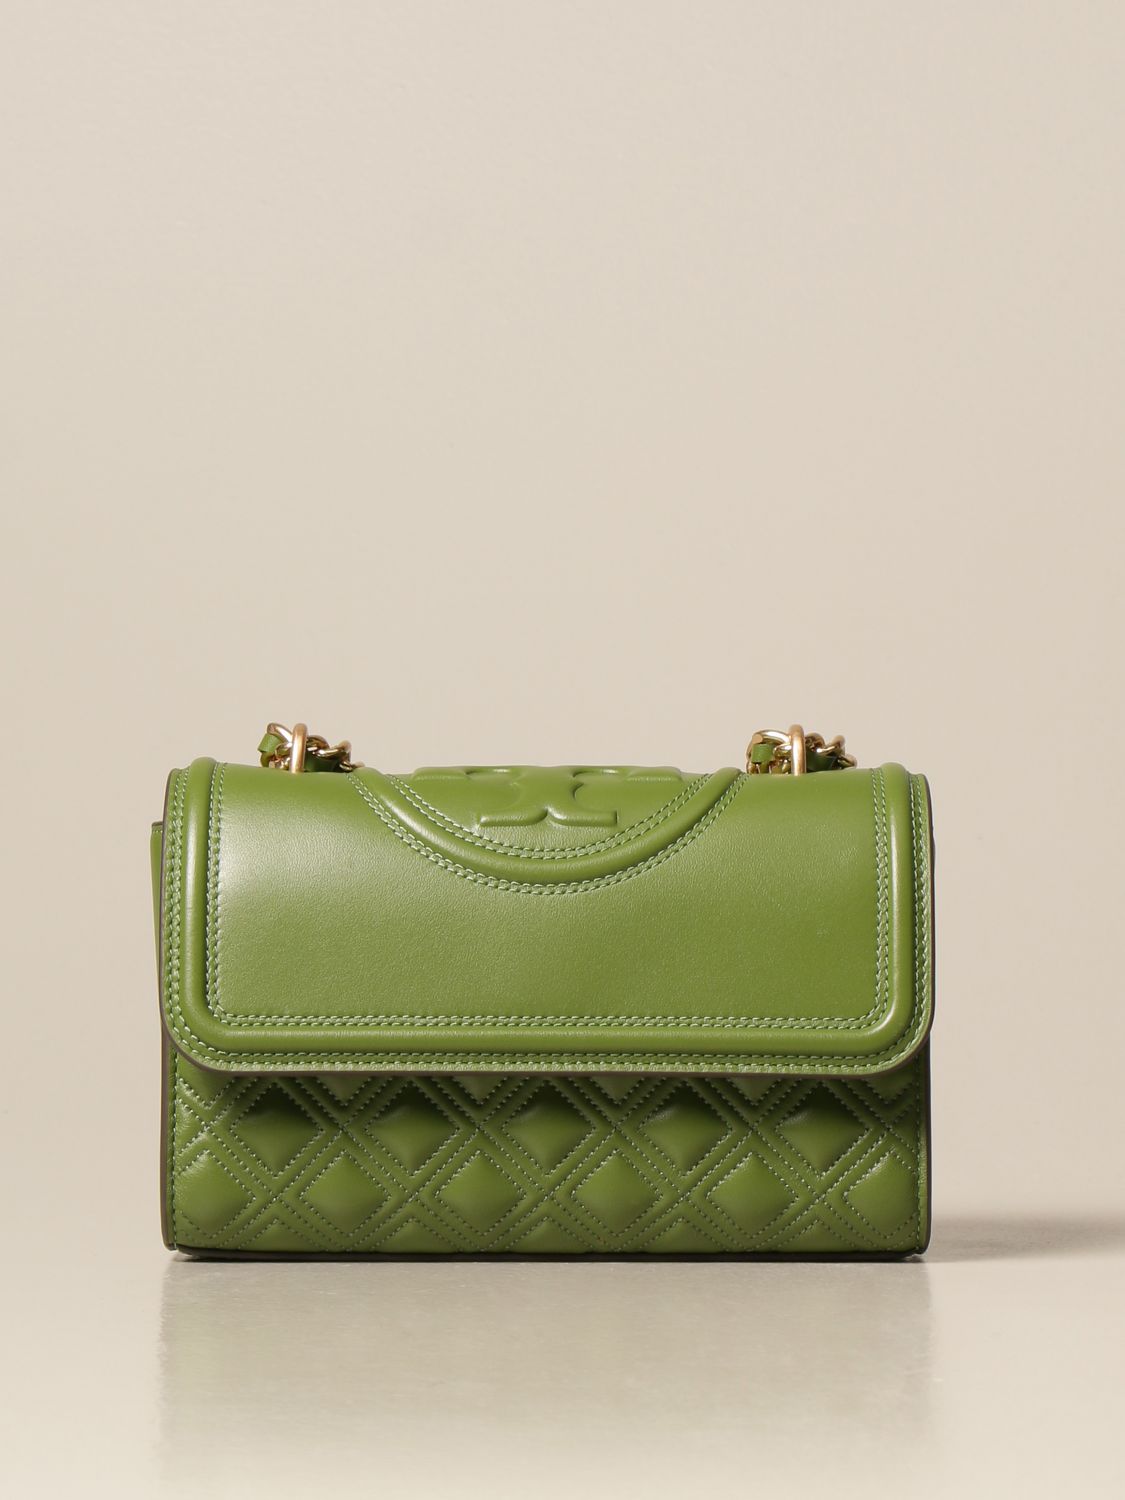 TORY BURCH: Fleming bag in quilted nappa - Green  Tory Burch crossbody  bags 75576 online at